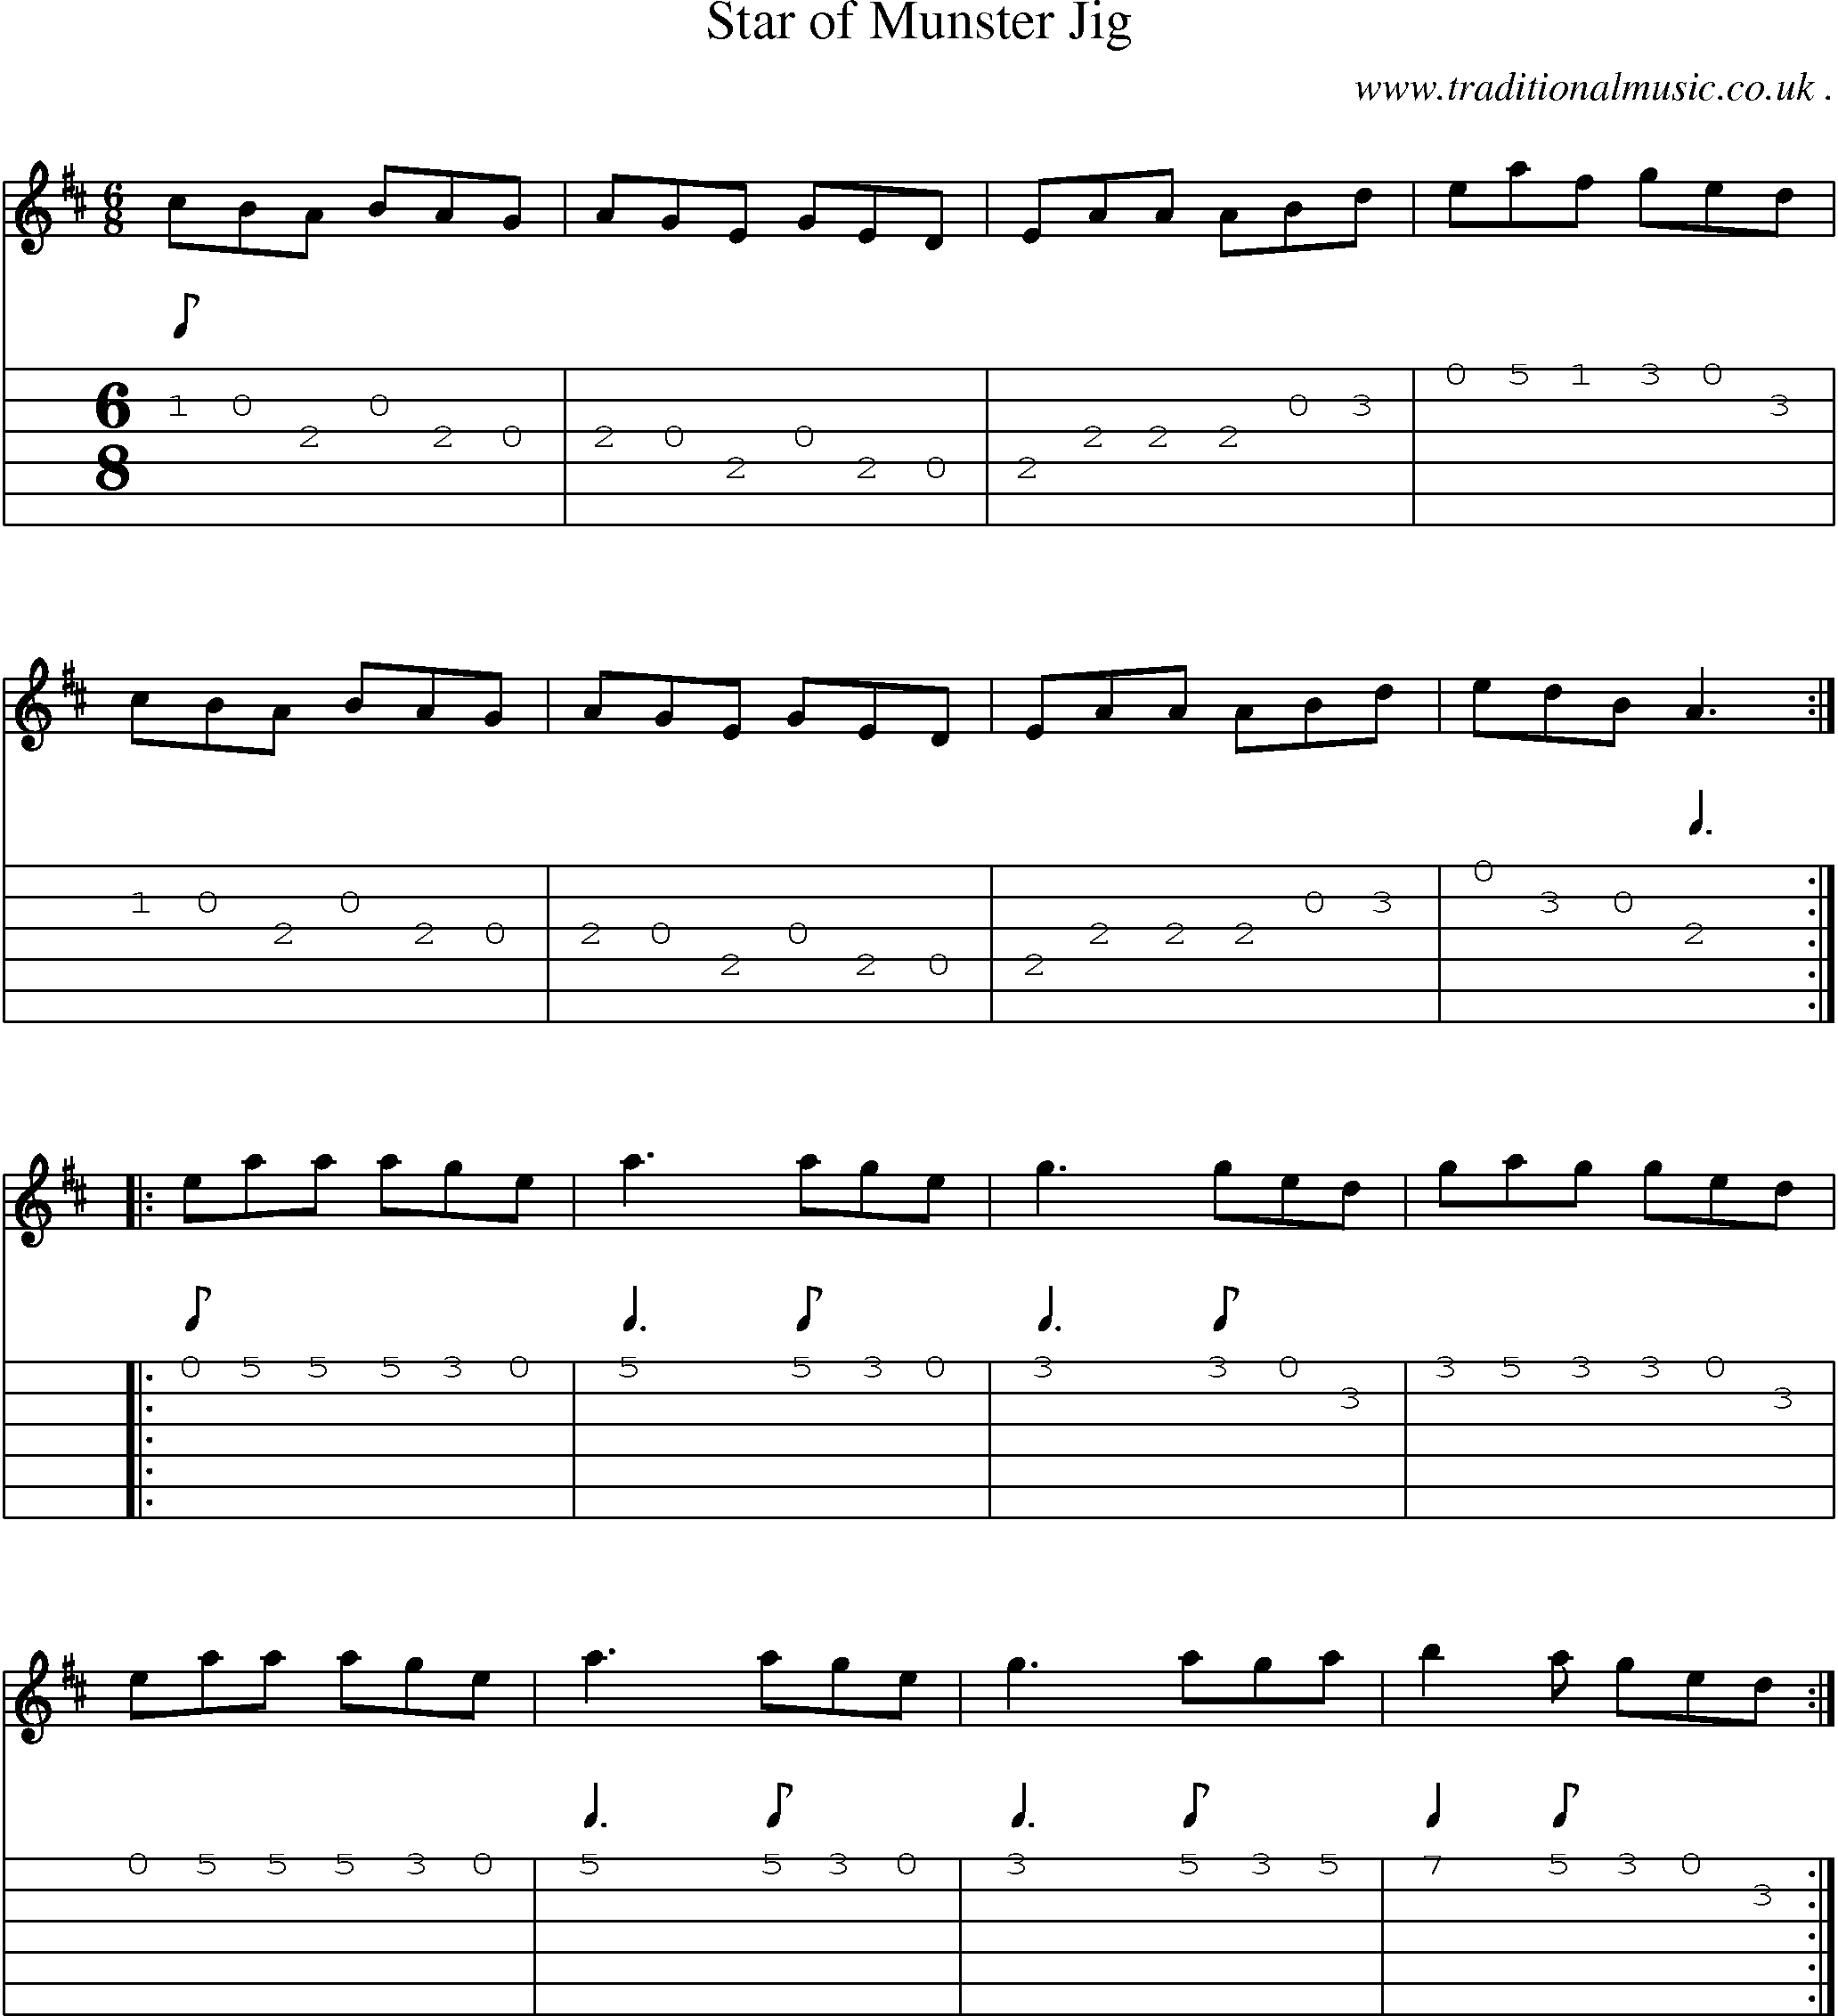 Iron Maiden "Wasted Years" Sheet Music Notes | Download Printable PDF ...